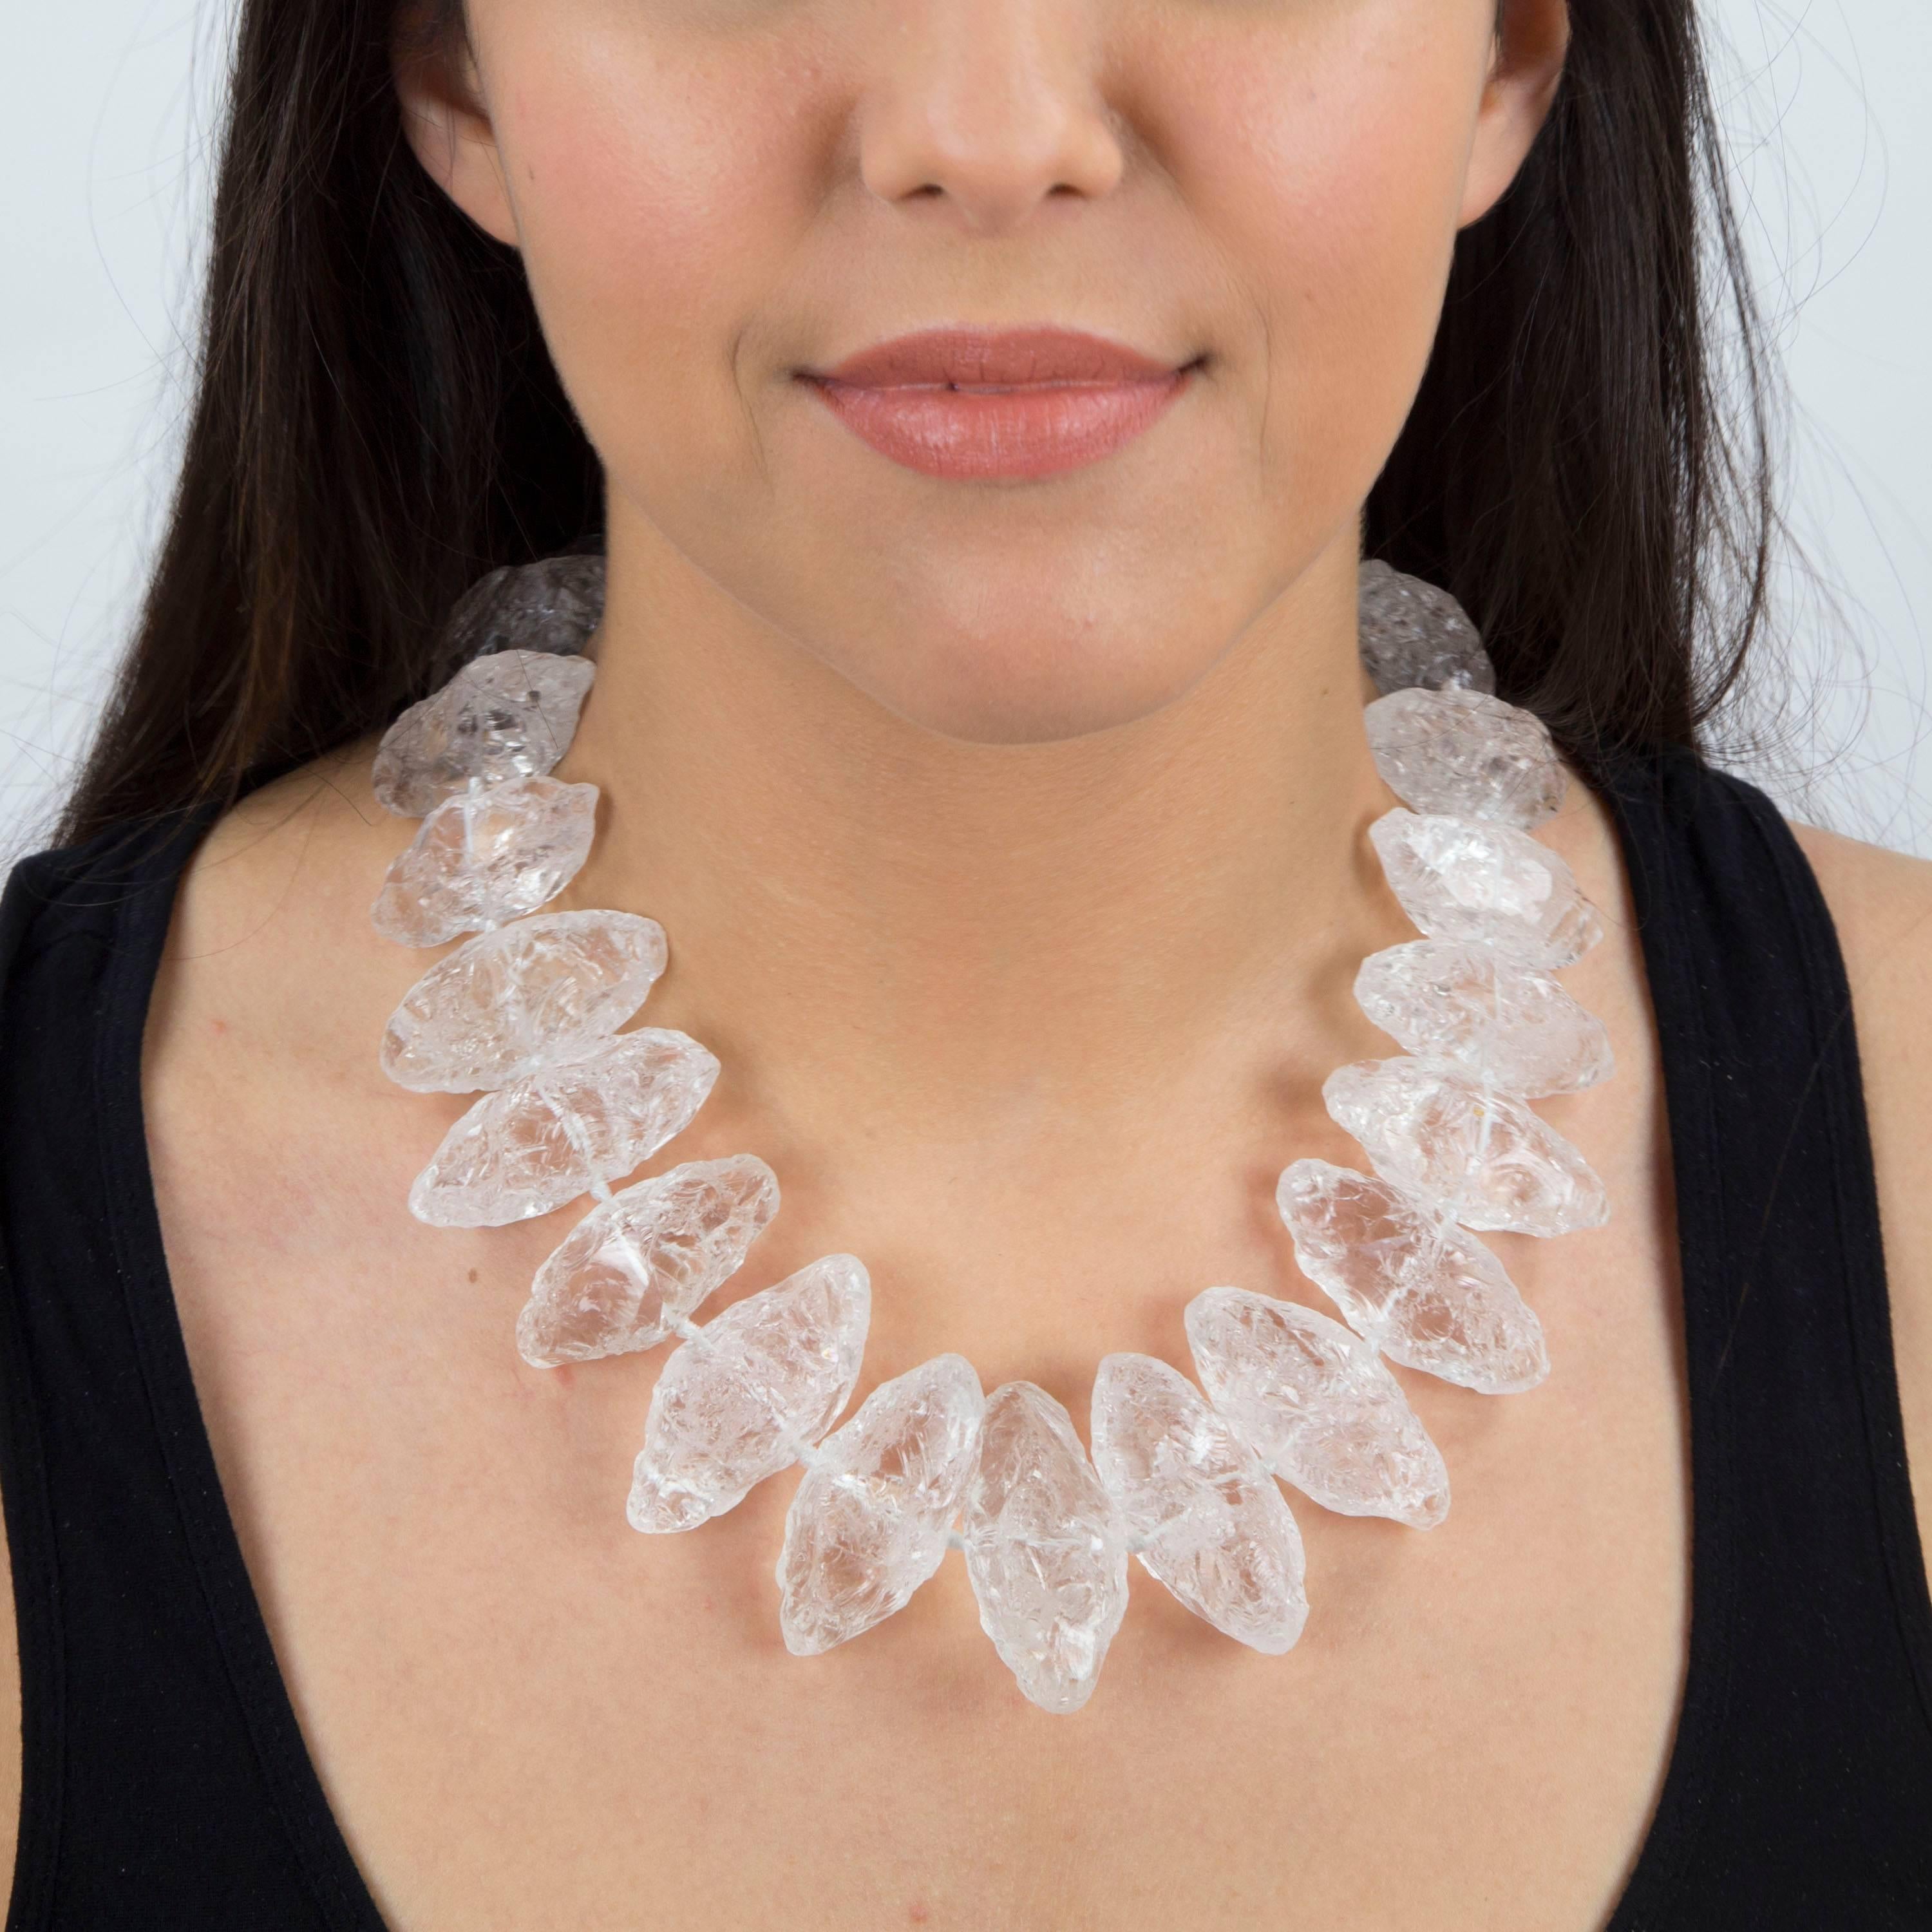 Dynamic Handmade Runway Necklace featuring pear shaped Natural Rock Crystal Gemstones held by a Gilt Sterling Silver clasp. Slightly graduated, each crystal measures approx. 41.5mm-48.5mm. Hand knotted on white silk cord. The beauty of these rock